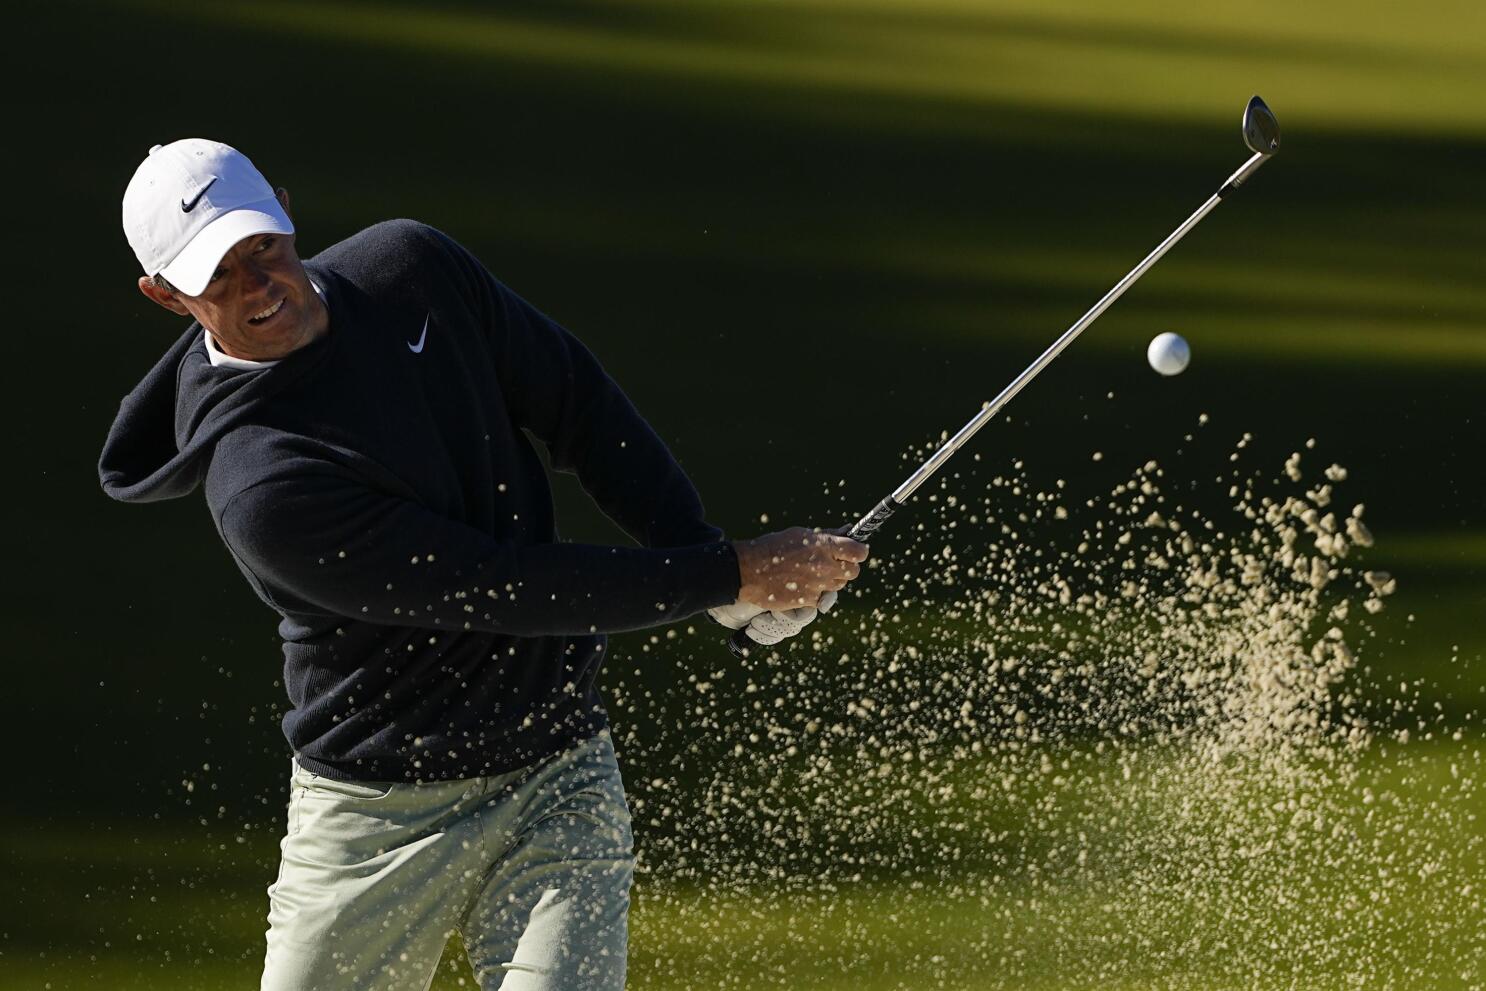 McIlroy shoots 68 in return; Fleetwood leads at Quail Hollow